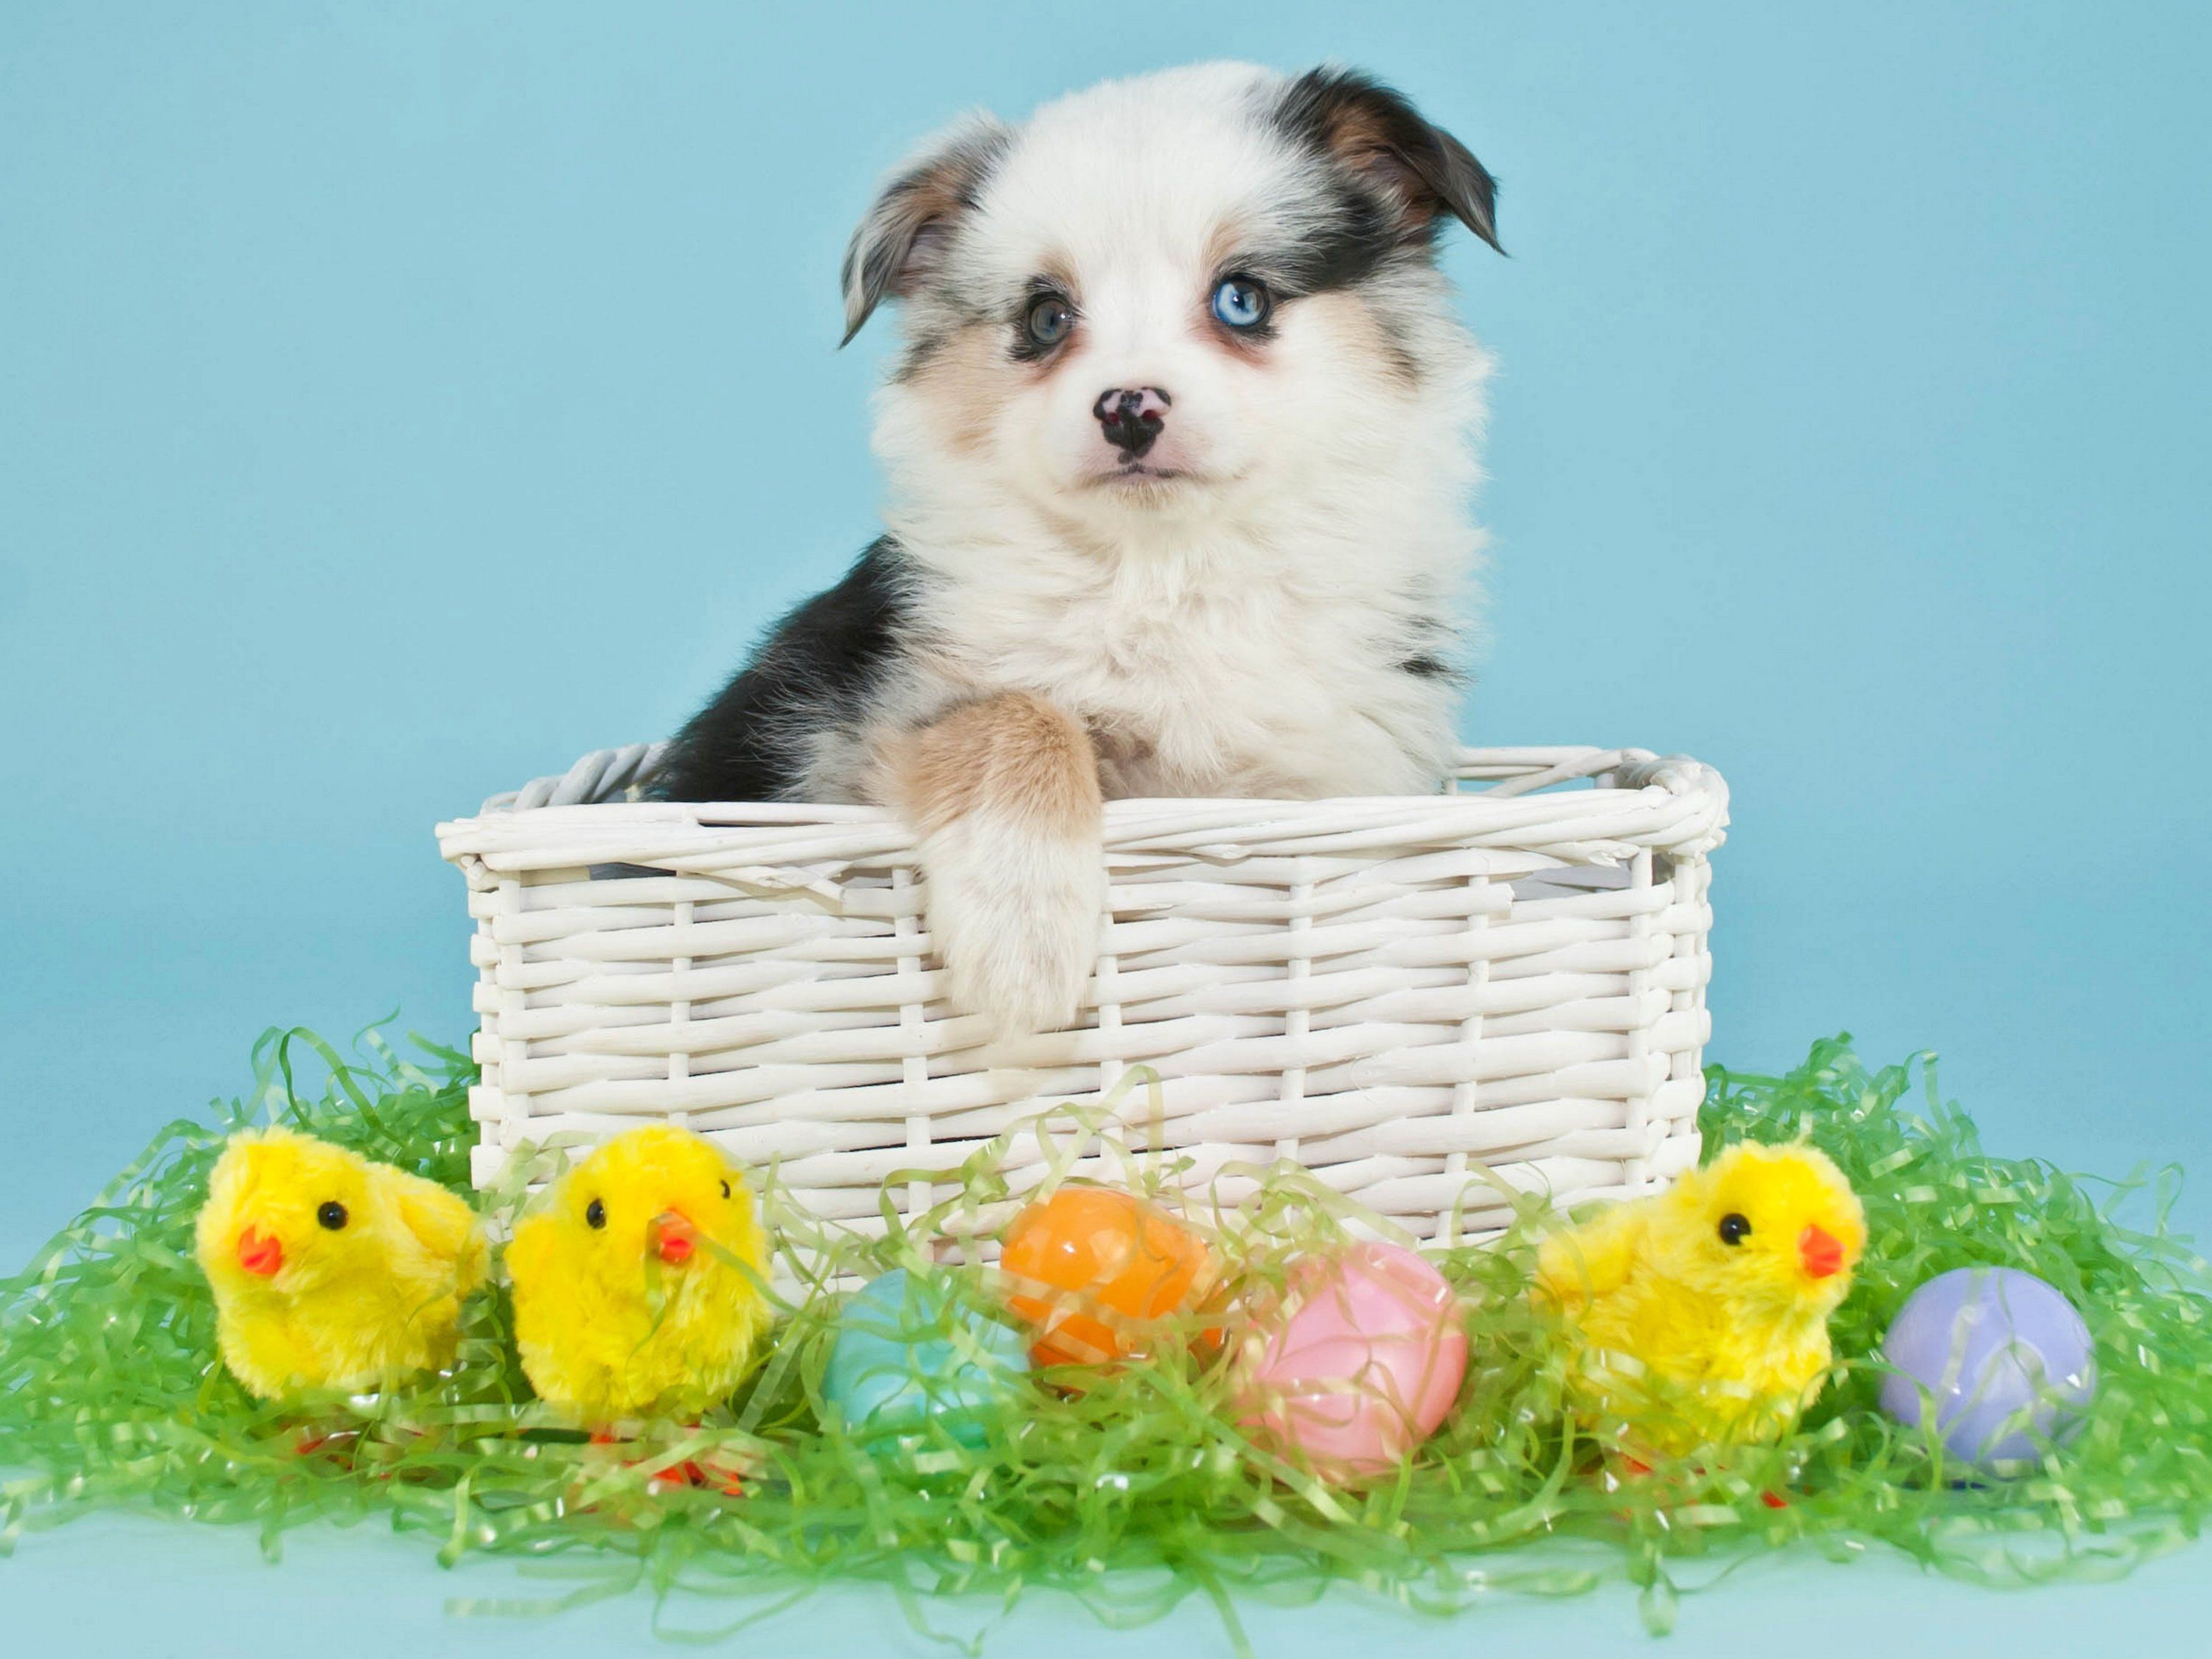 Dogs Holidays Easter Chickens Puppy Wicker basket Eggs Animals wallpaperx2250